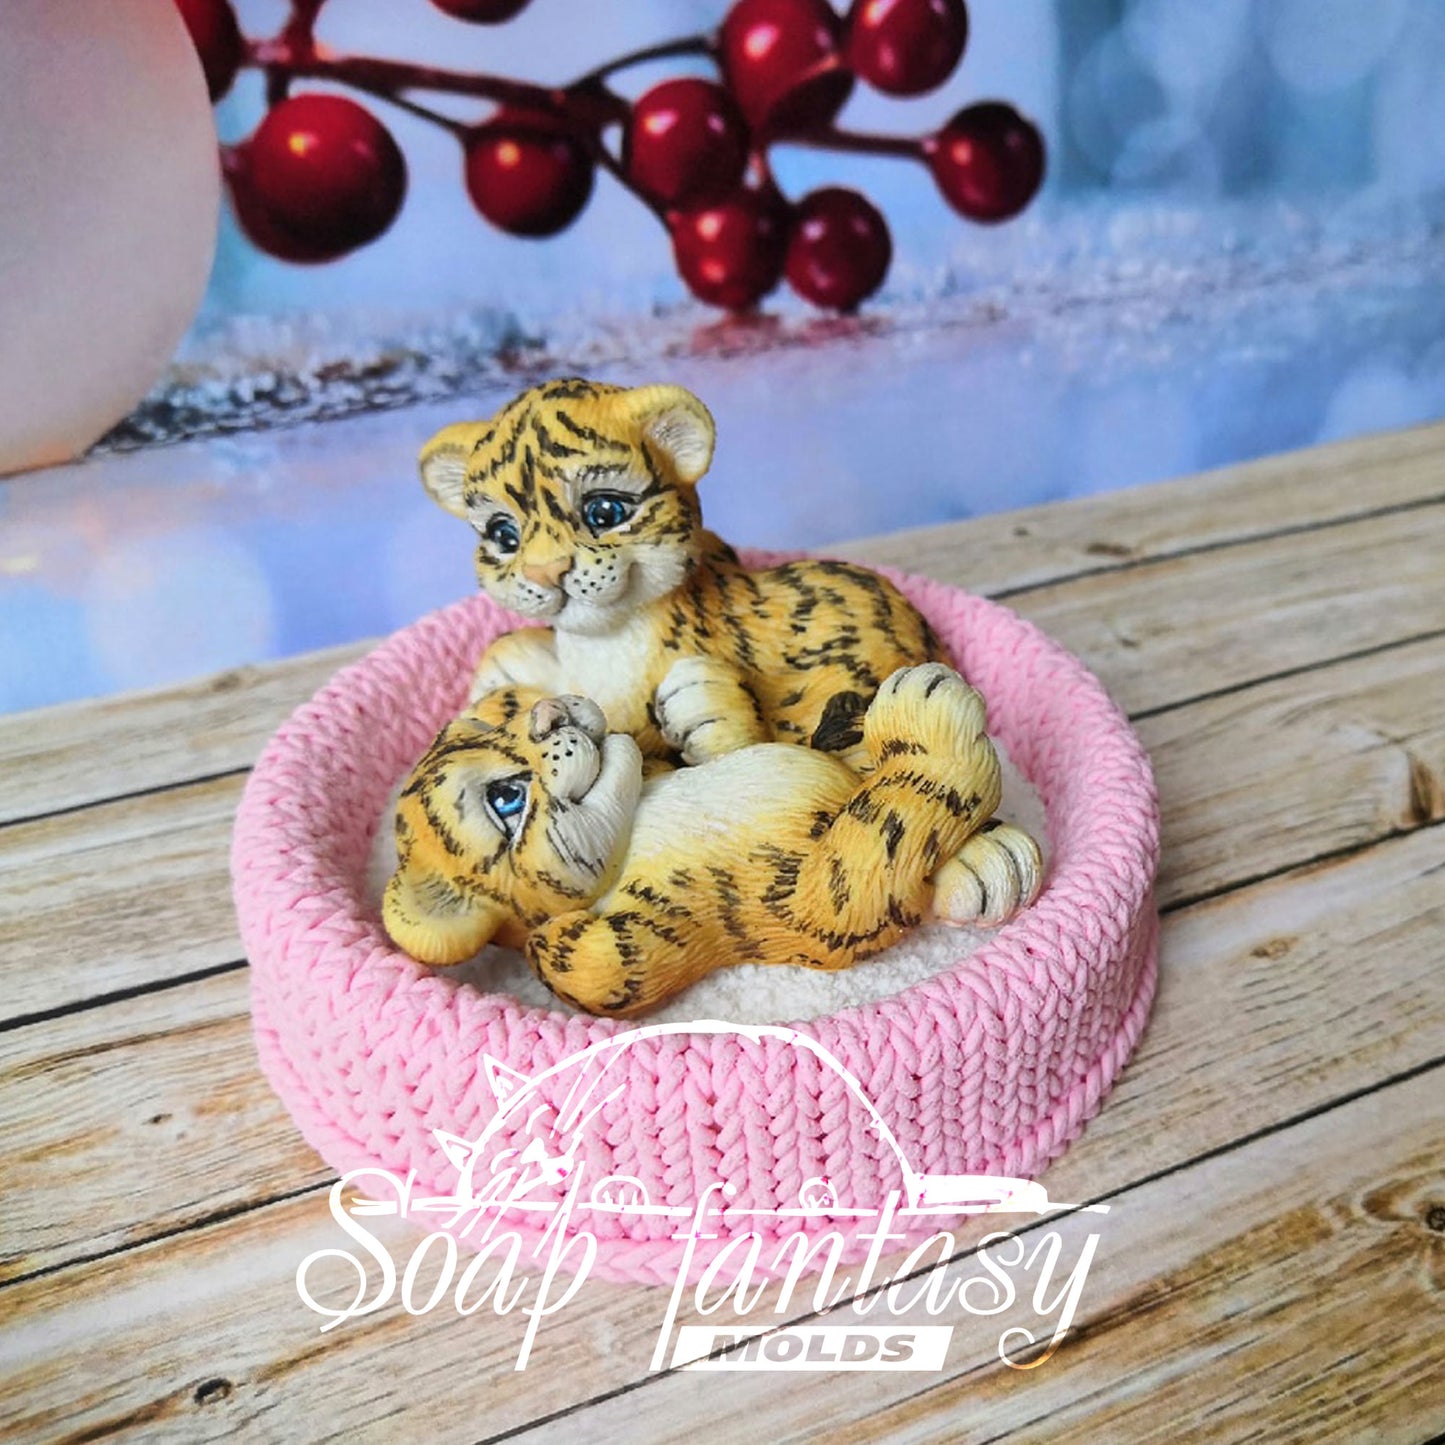 So cute sleeping tiger baby cub silicone mold for soap making